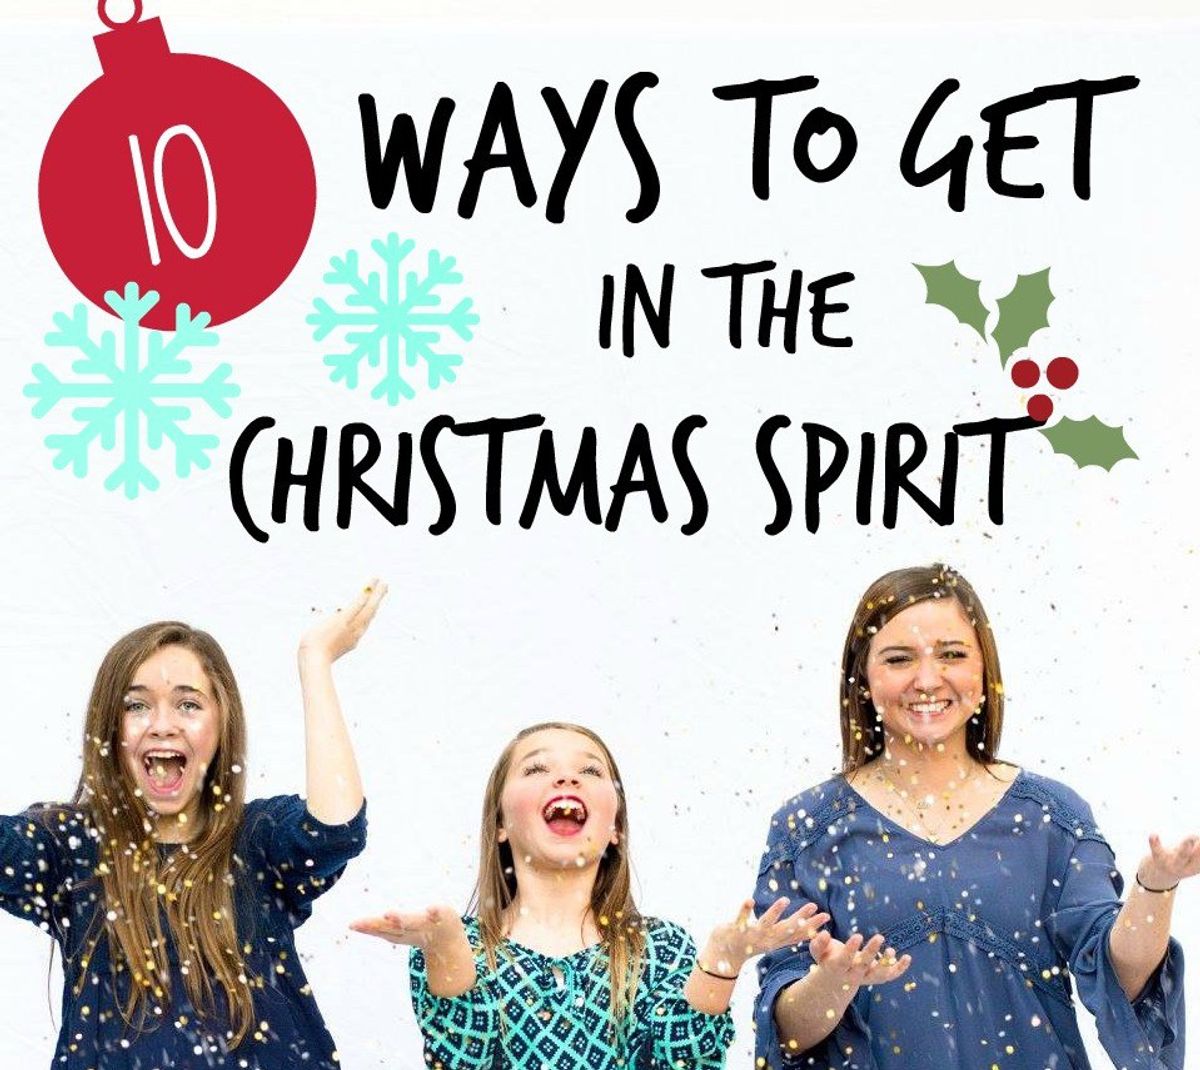 10 Ways To Get Into The Christmas Spirit